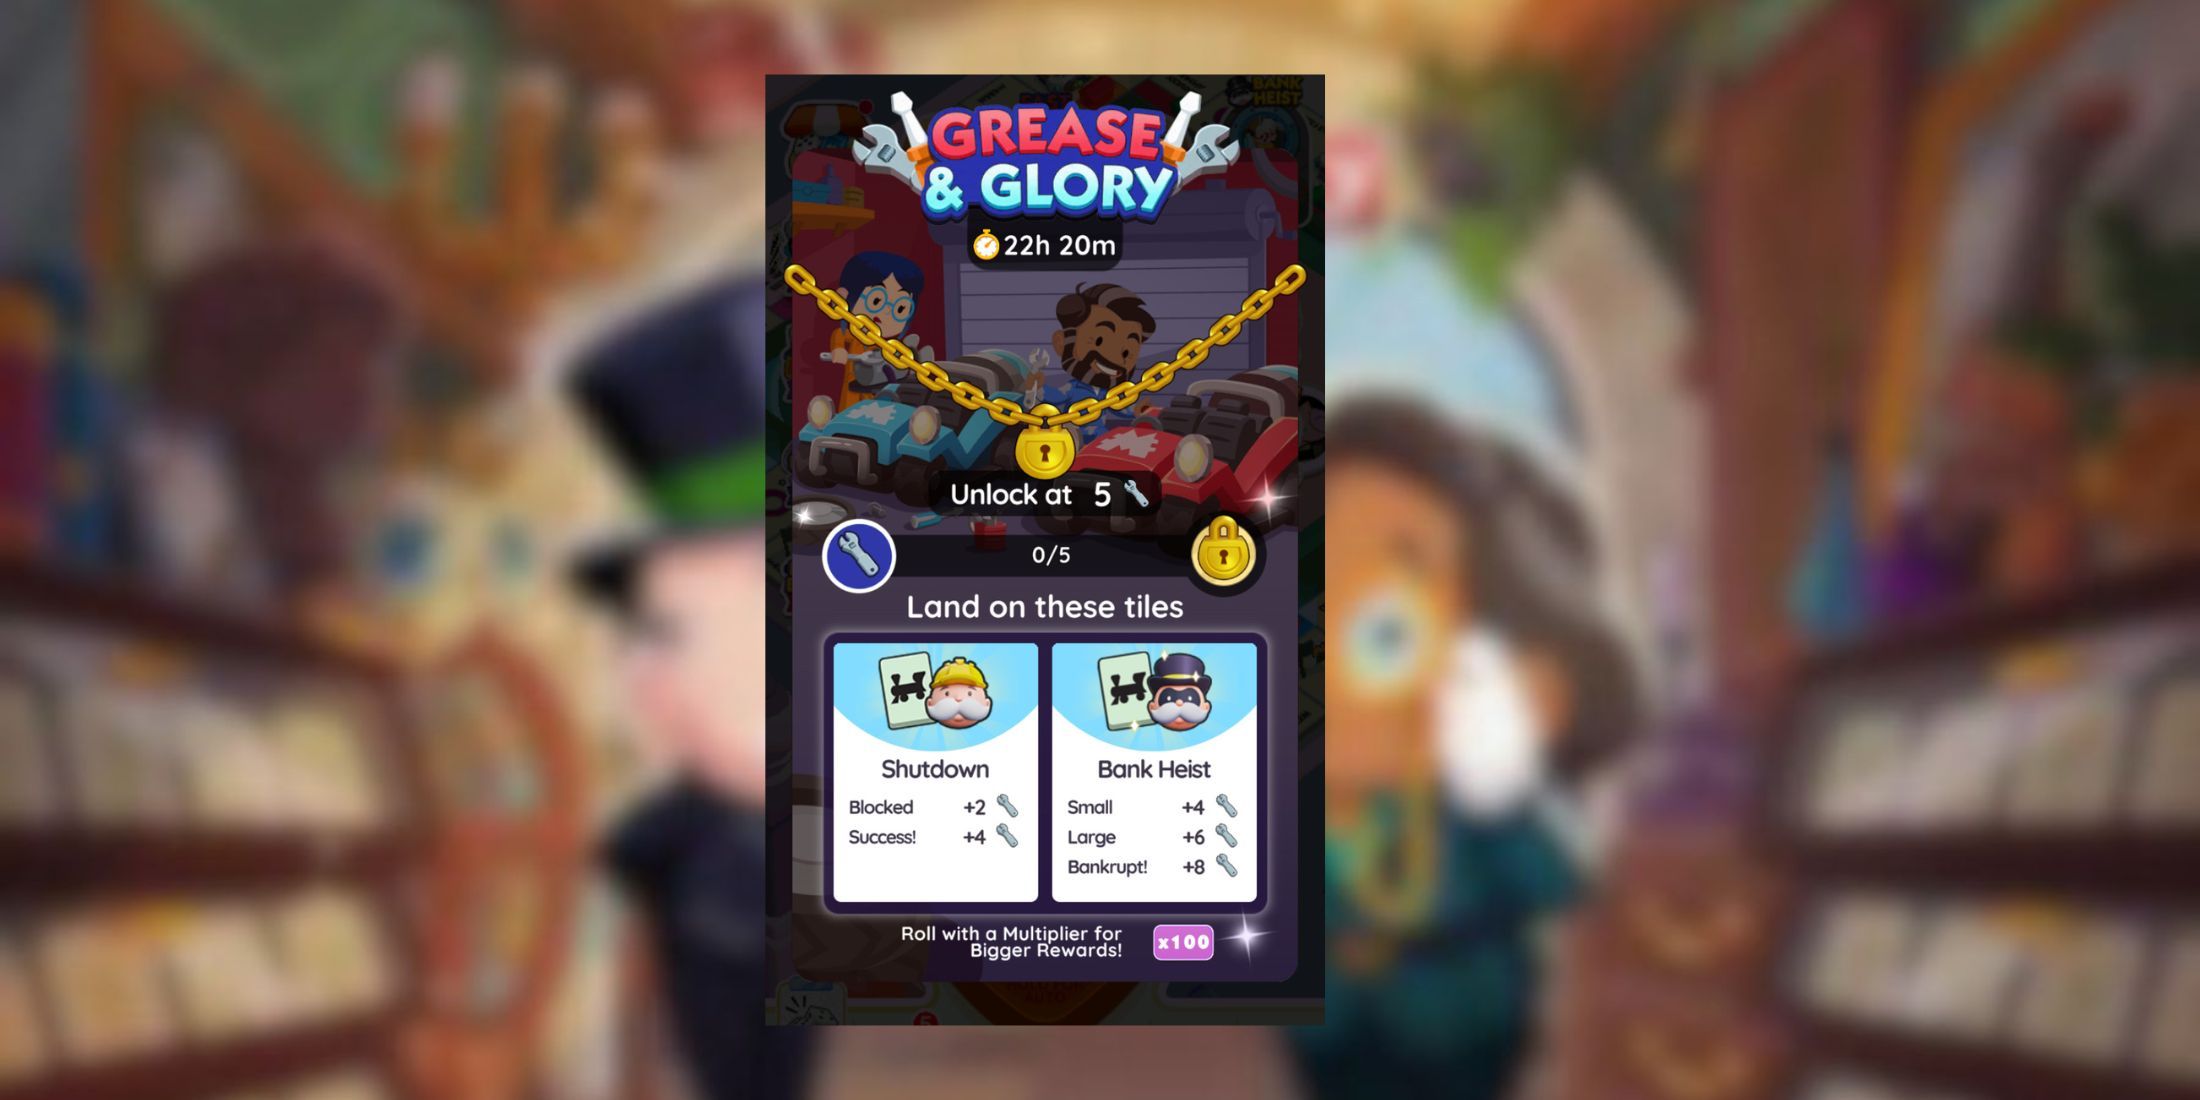 Grease and Glory event in Monopoly GO